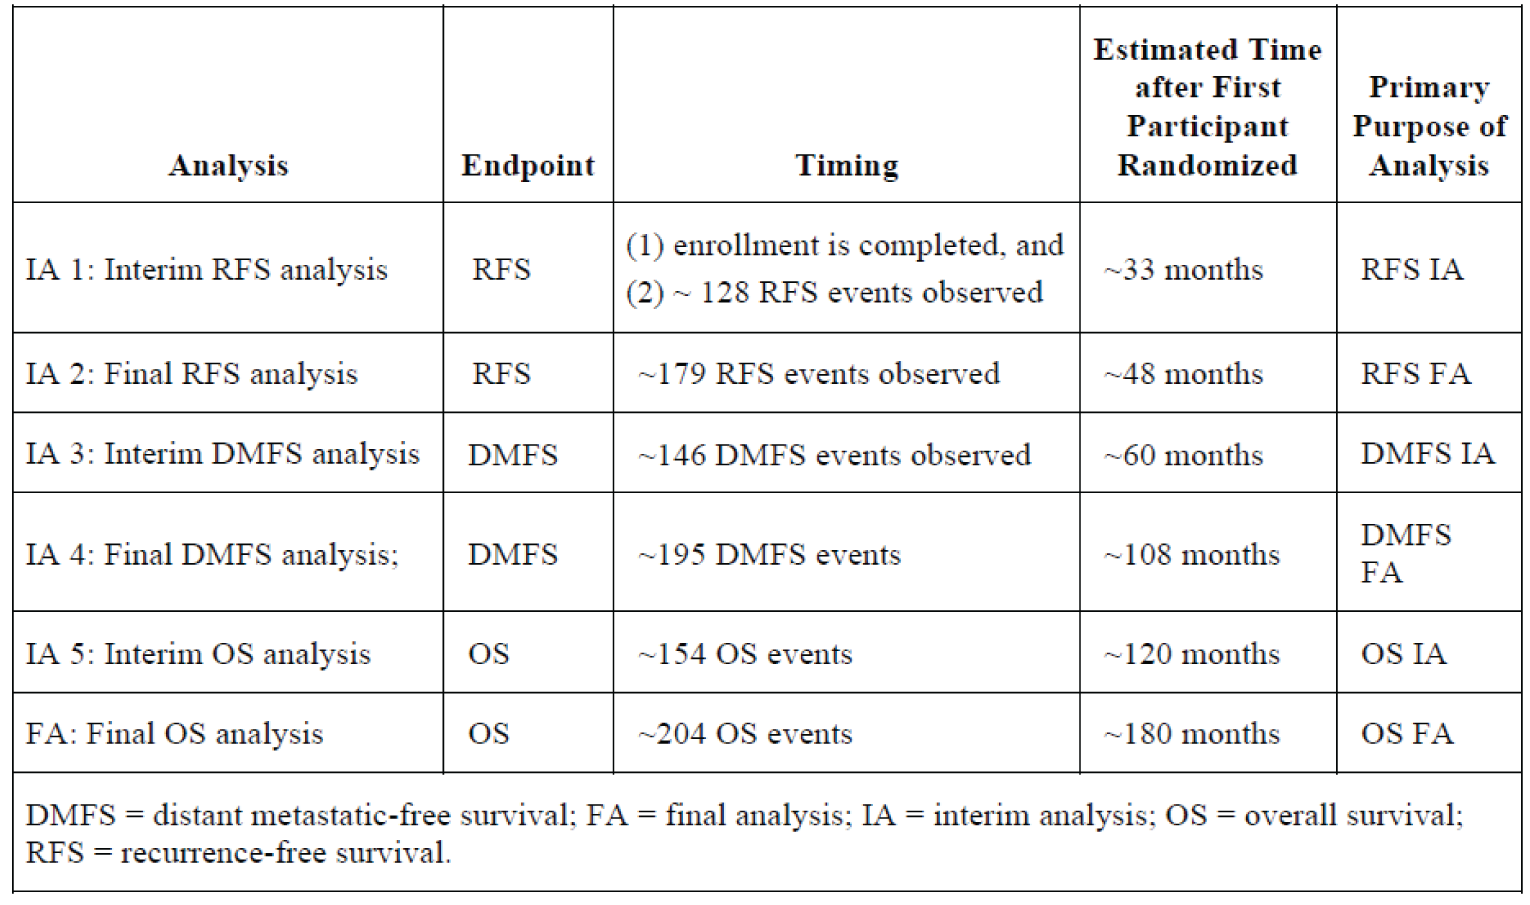 A table outlining the timing, the estimated amount of time after first participant was randomized, and the primary purpose of the analysis, for each interim analysis and associated end point (i.e., RFS, DMFS, and OS).